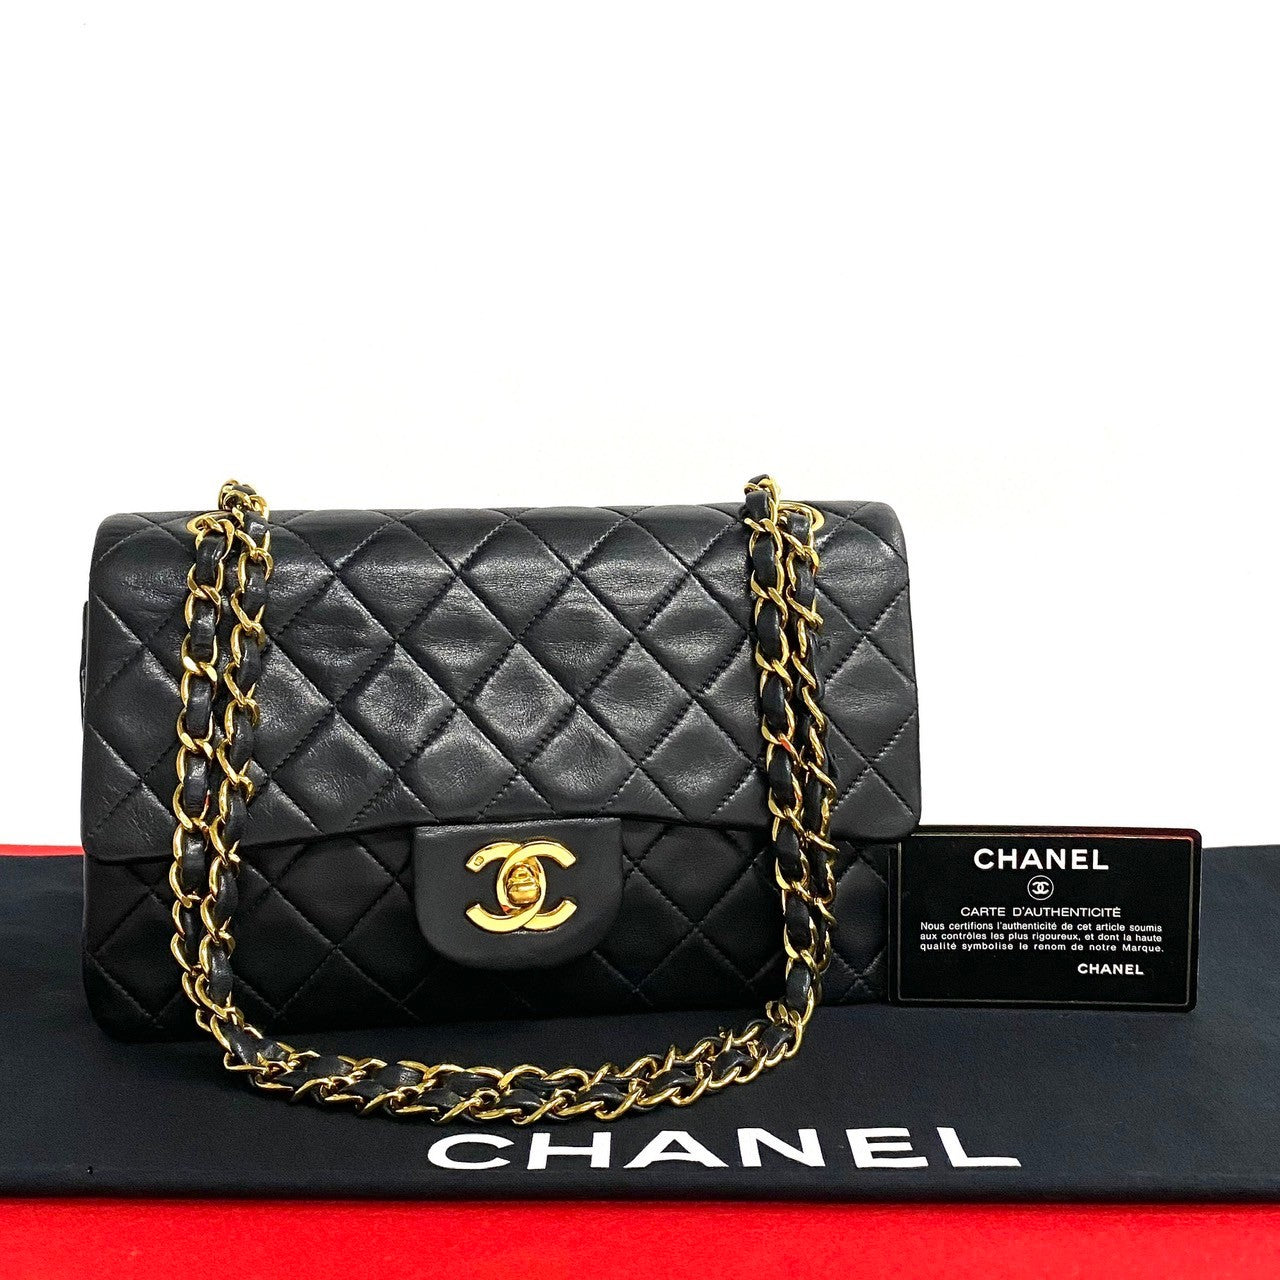 Chanel Matelasse Double Flap Leather Shoulder Bag 无法识别 in Good condition